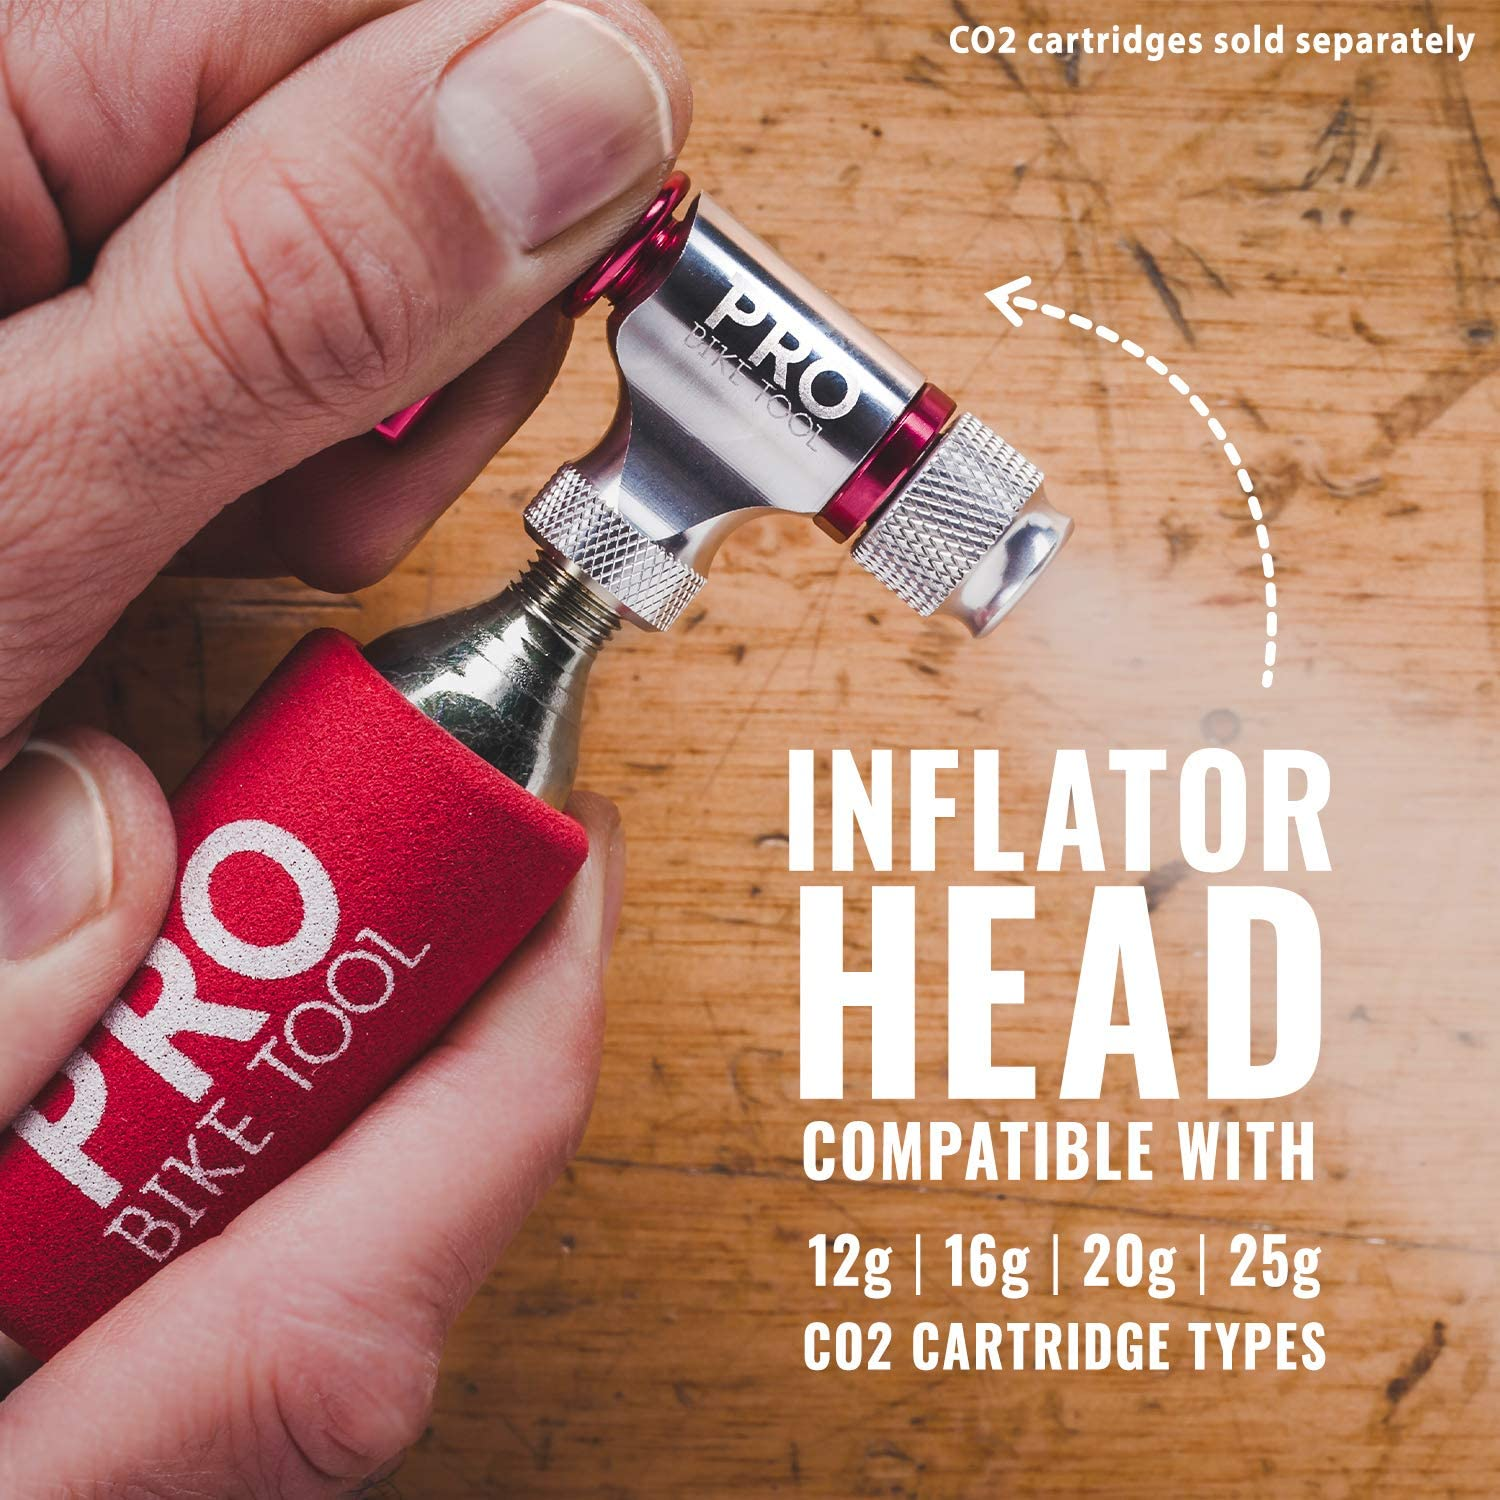 If your tool bag is not that big then consider taking a CO2 inflator like this as it is smaller.